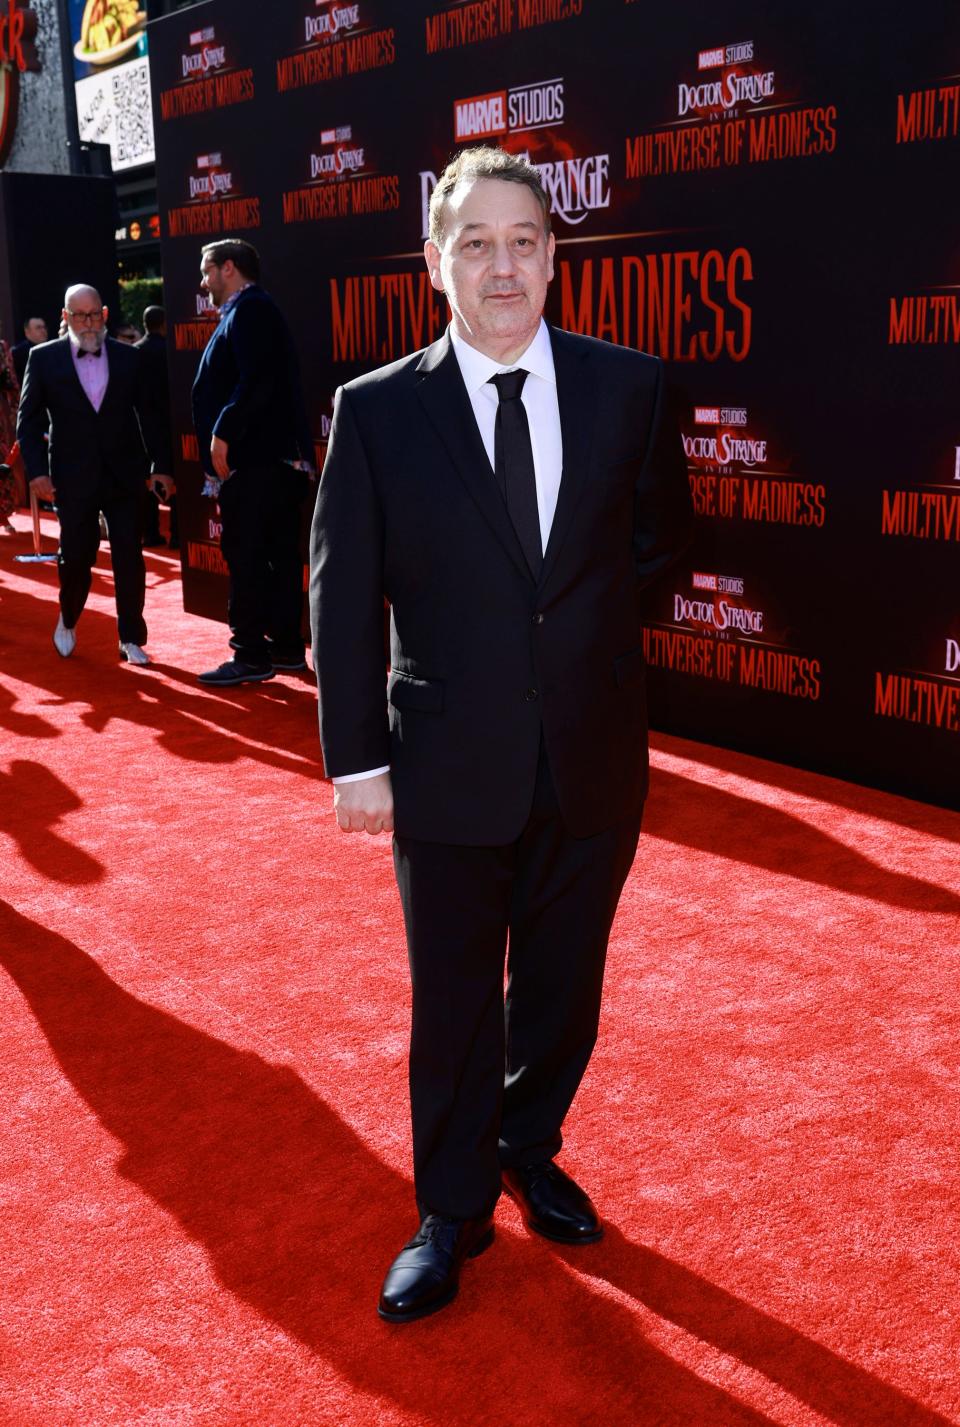 Sam Raimi wearing a black suit and tie at the LA premiere of "Doctor Strange in the Multiverse of Madness" in May 2022.